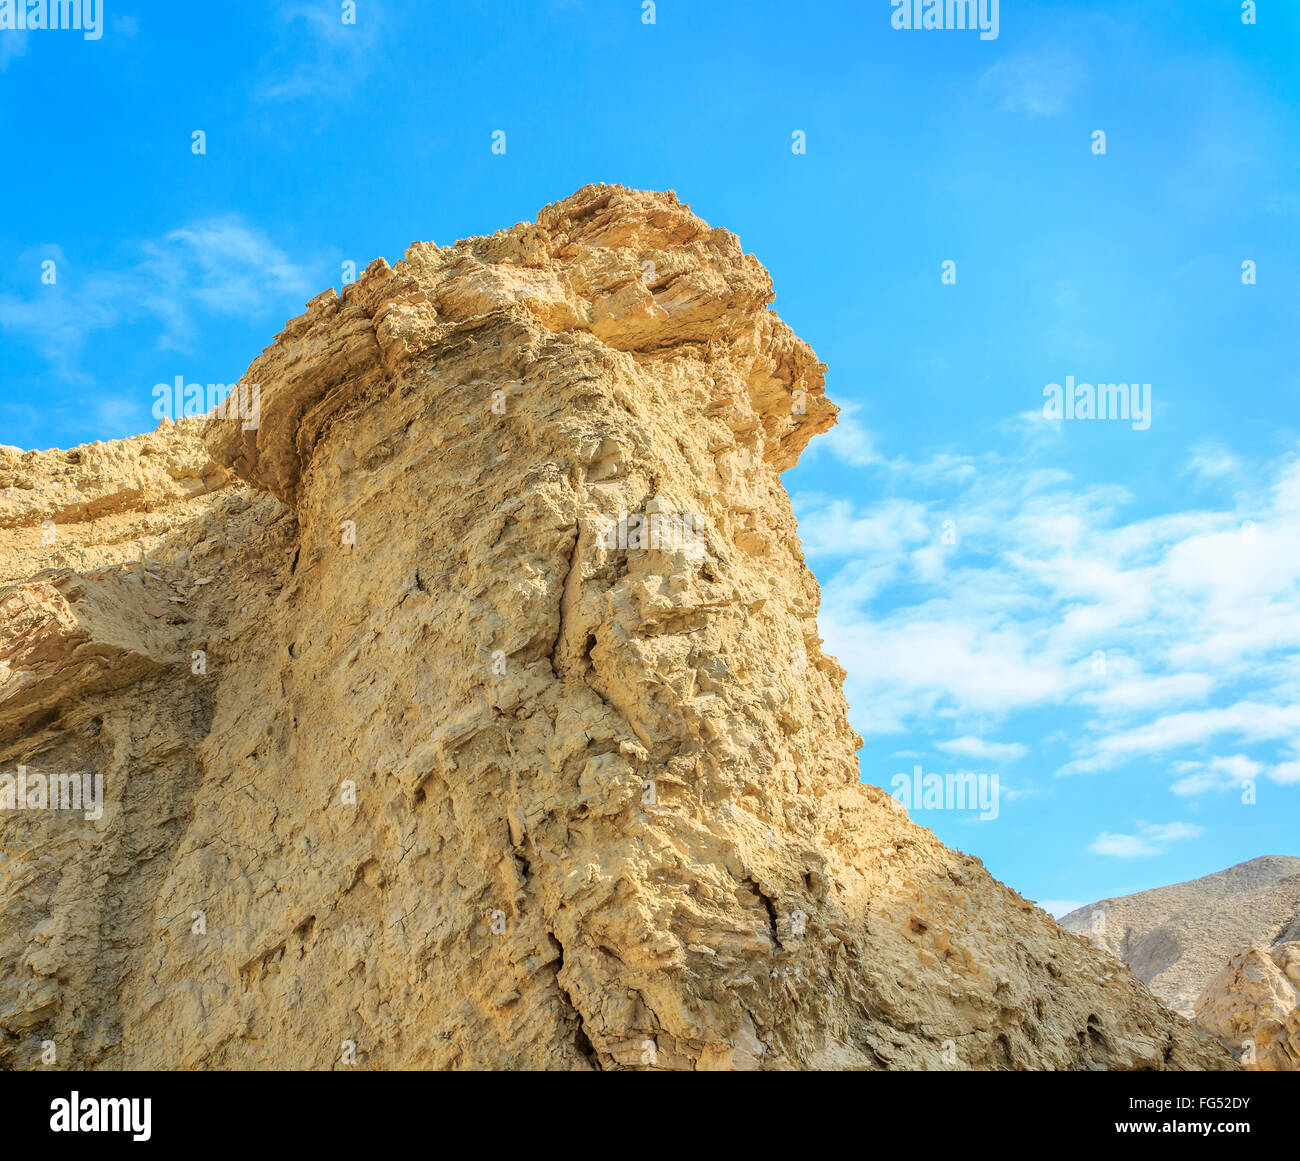 Cretaceous rocks of the Judean Desert on a background of blue sky Stock Photo